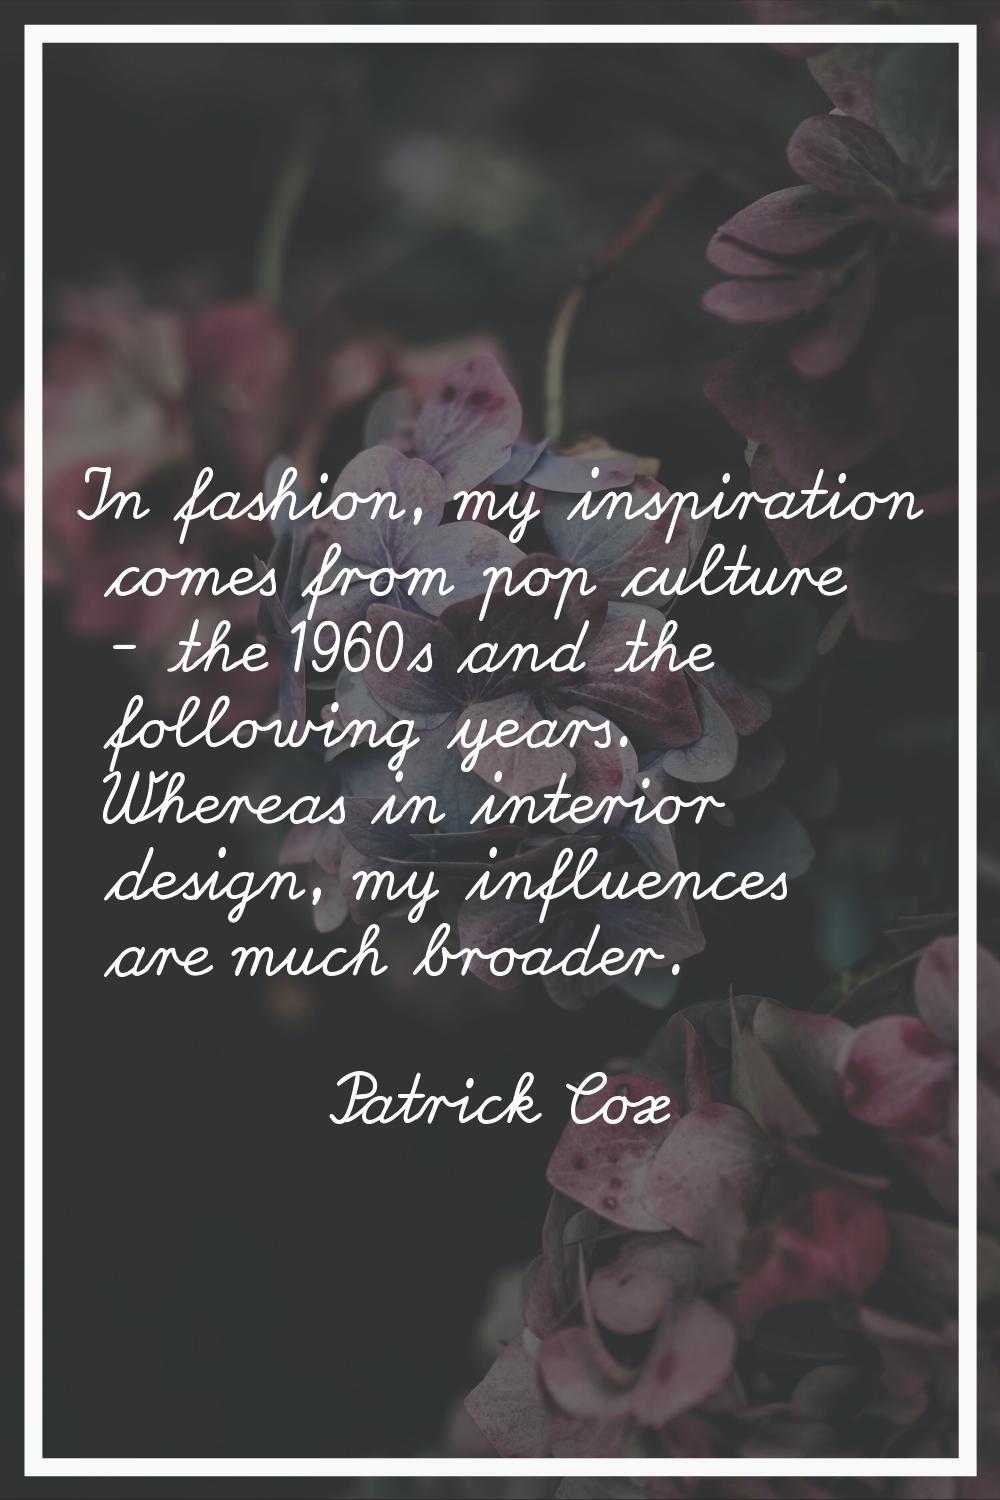 In fashion, my inspiration comes from pop culture - the 1960s and the following years. Whereas in i